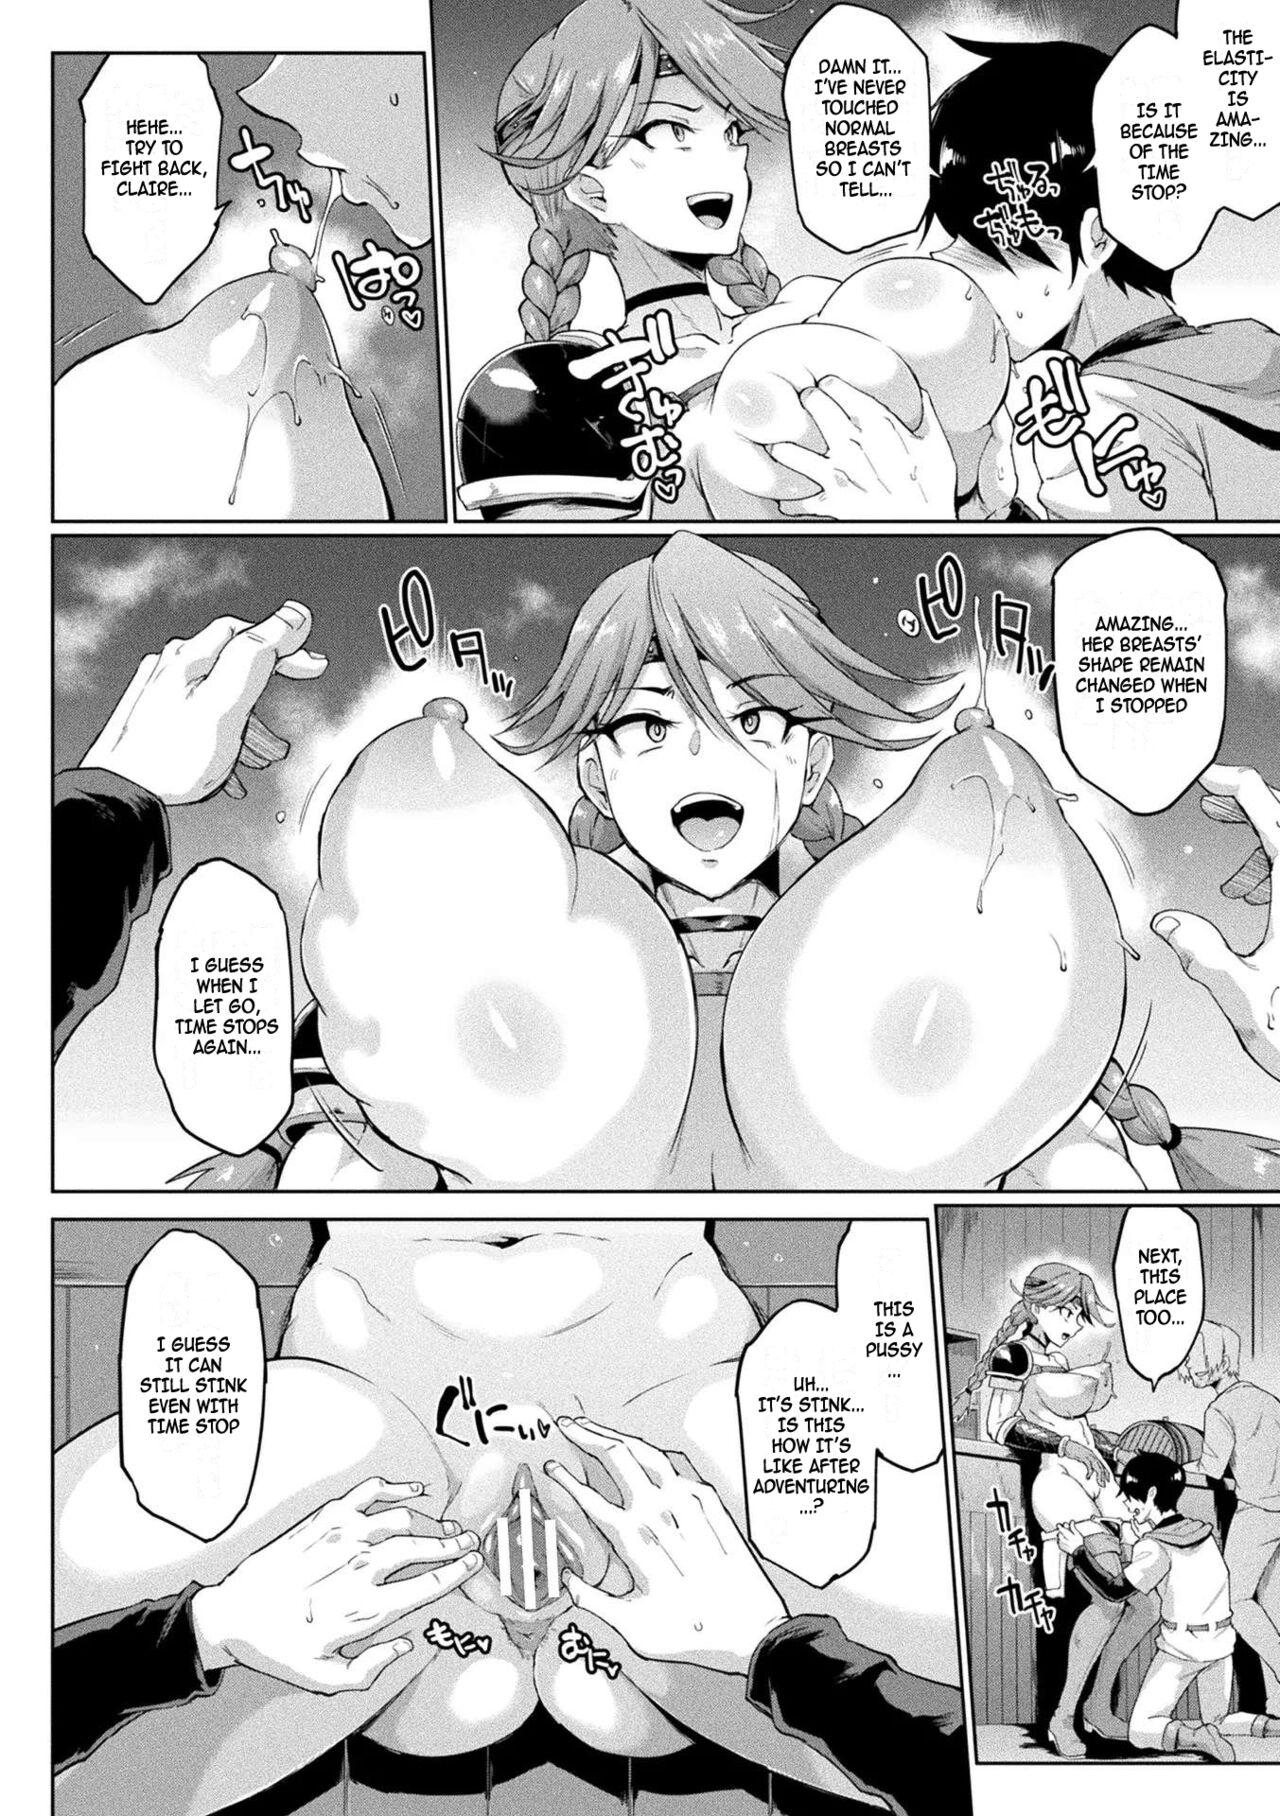 Gay Physicalexamination Time Stop Fantasia Full - Page 8